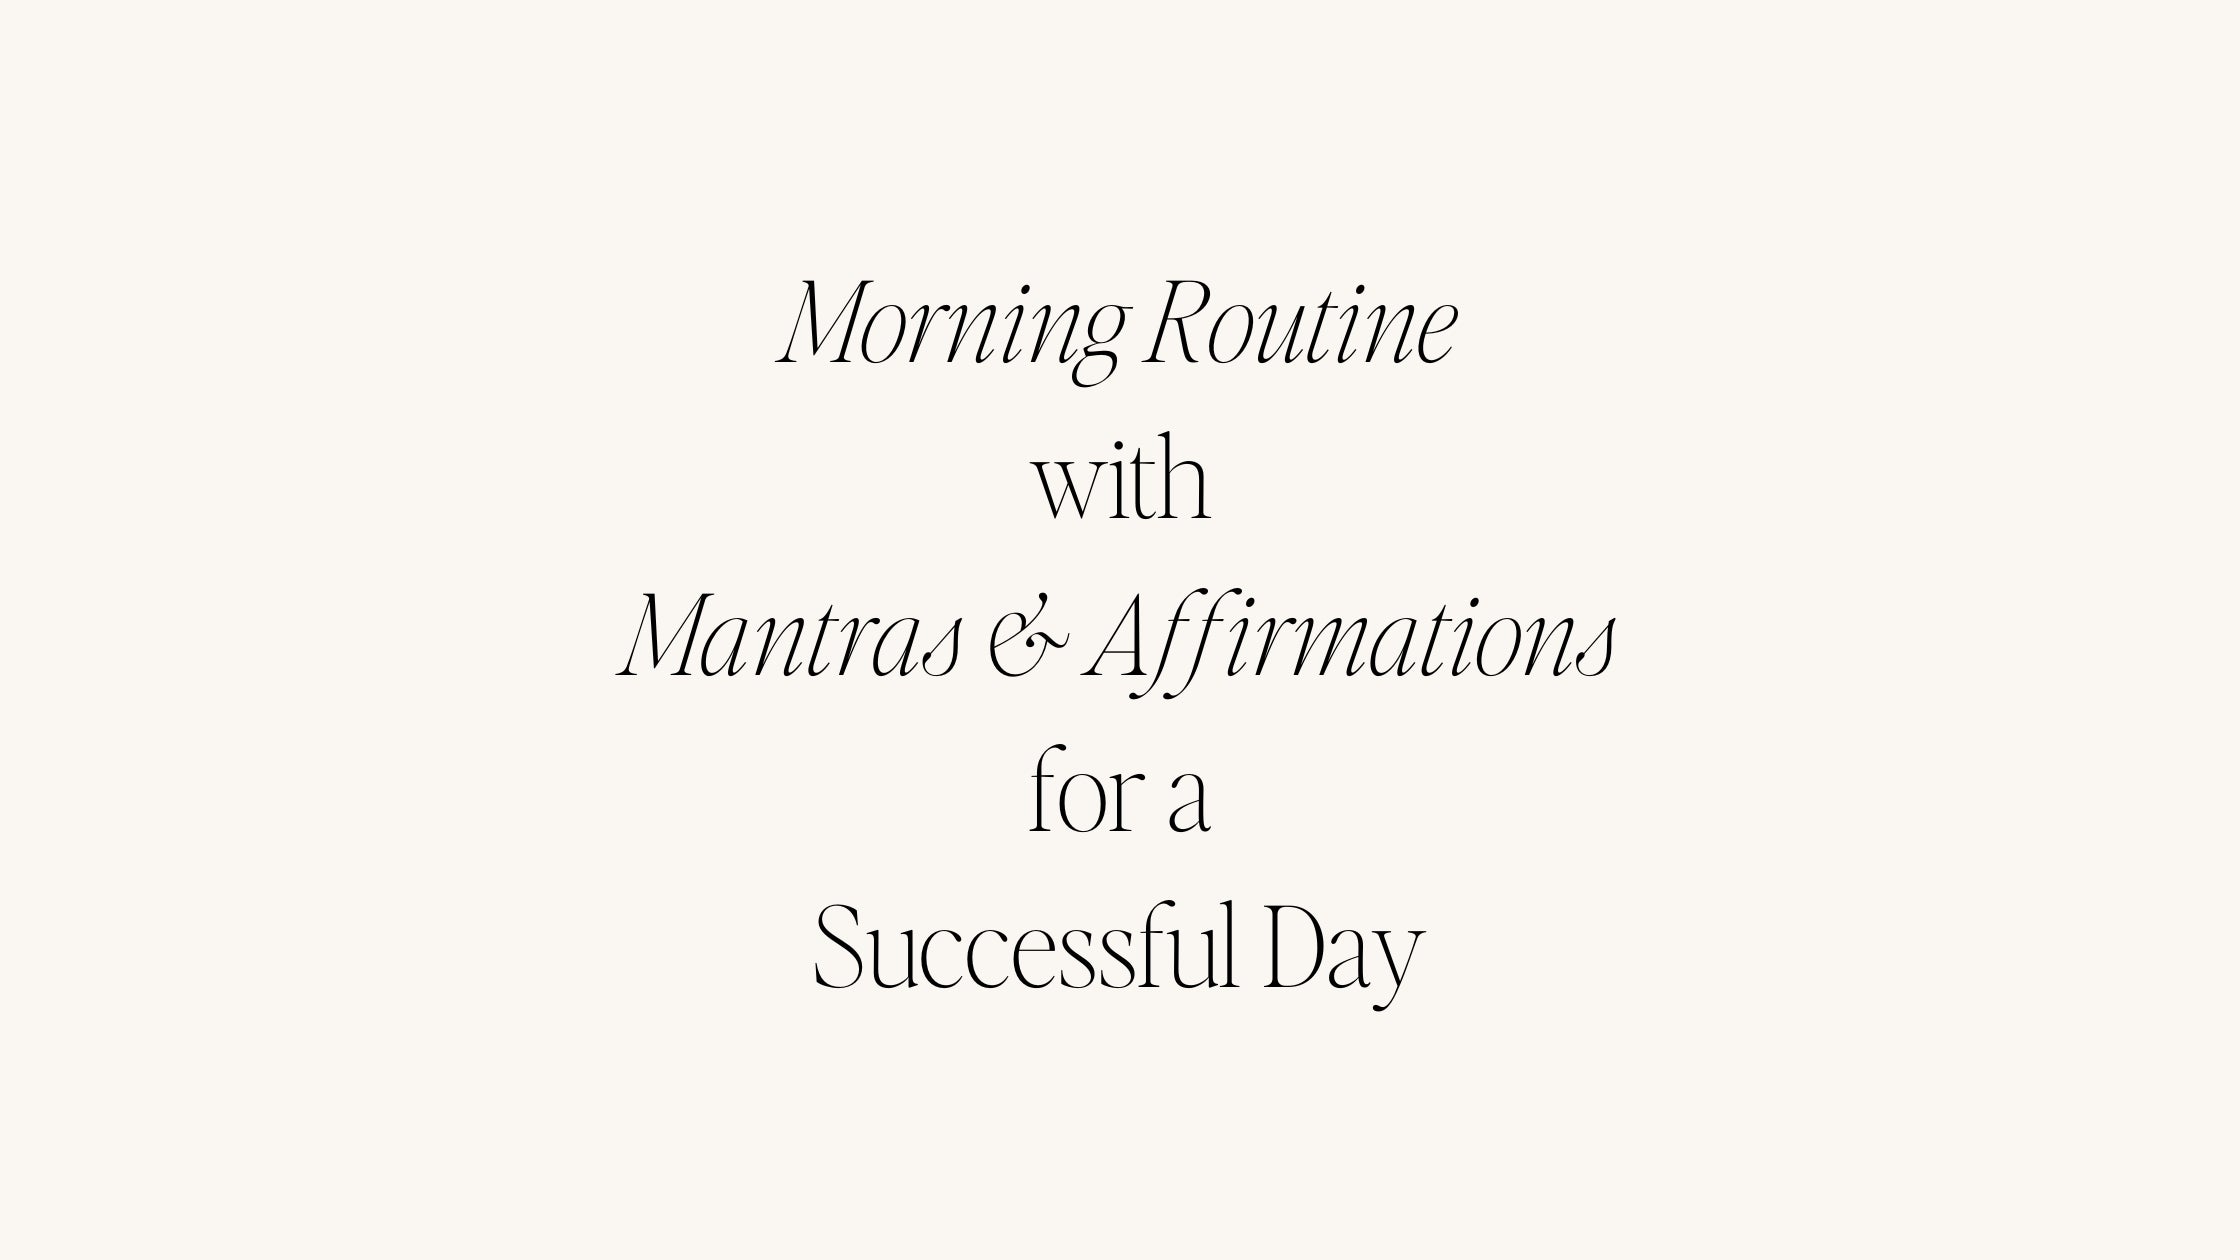 How to Create a Morning Routine with Mantras and Affirmations for a Successful Day